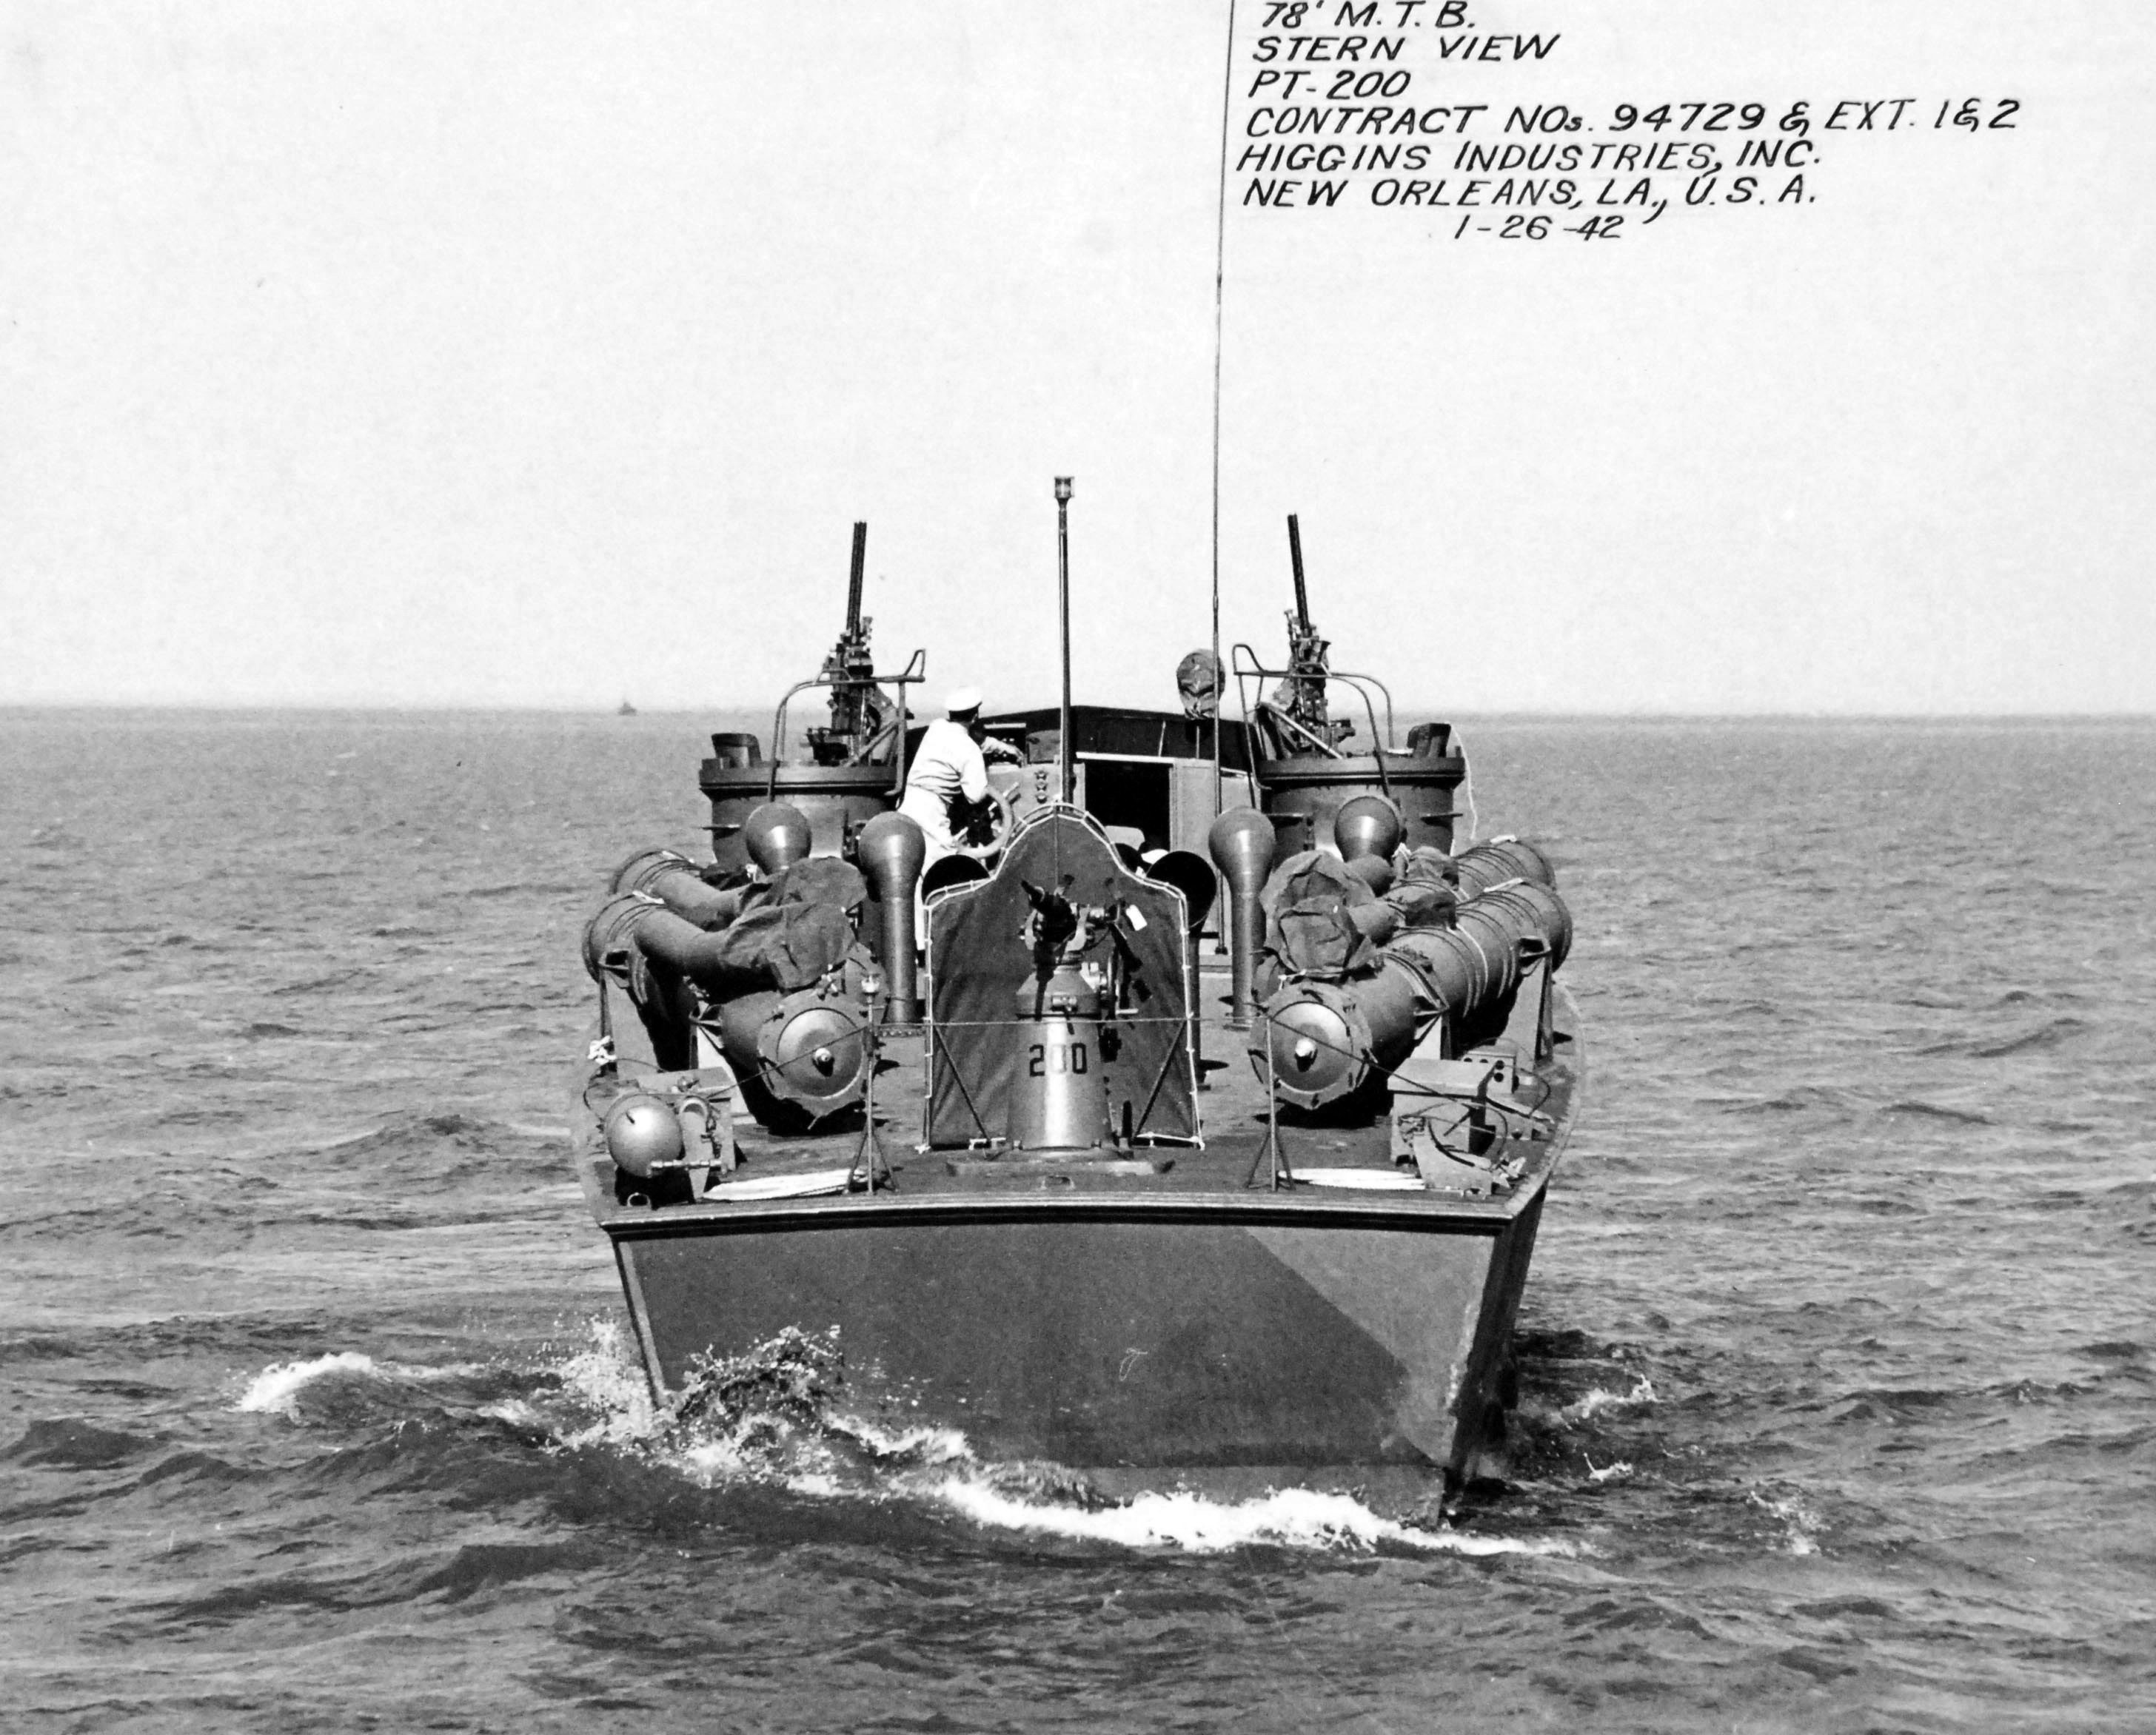 Higgins 78-foot PT Boat photographed 26 Jan 1943 by Higgins Industries in New Orleans, Louisiana before delivery to the US Navy. This boat went on to serve as PT-200 and spent her career as a training boat. Photo 5 of 6